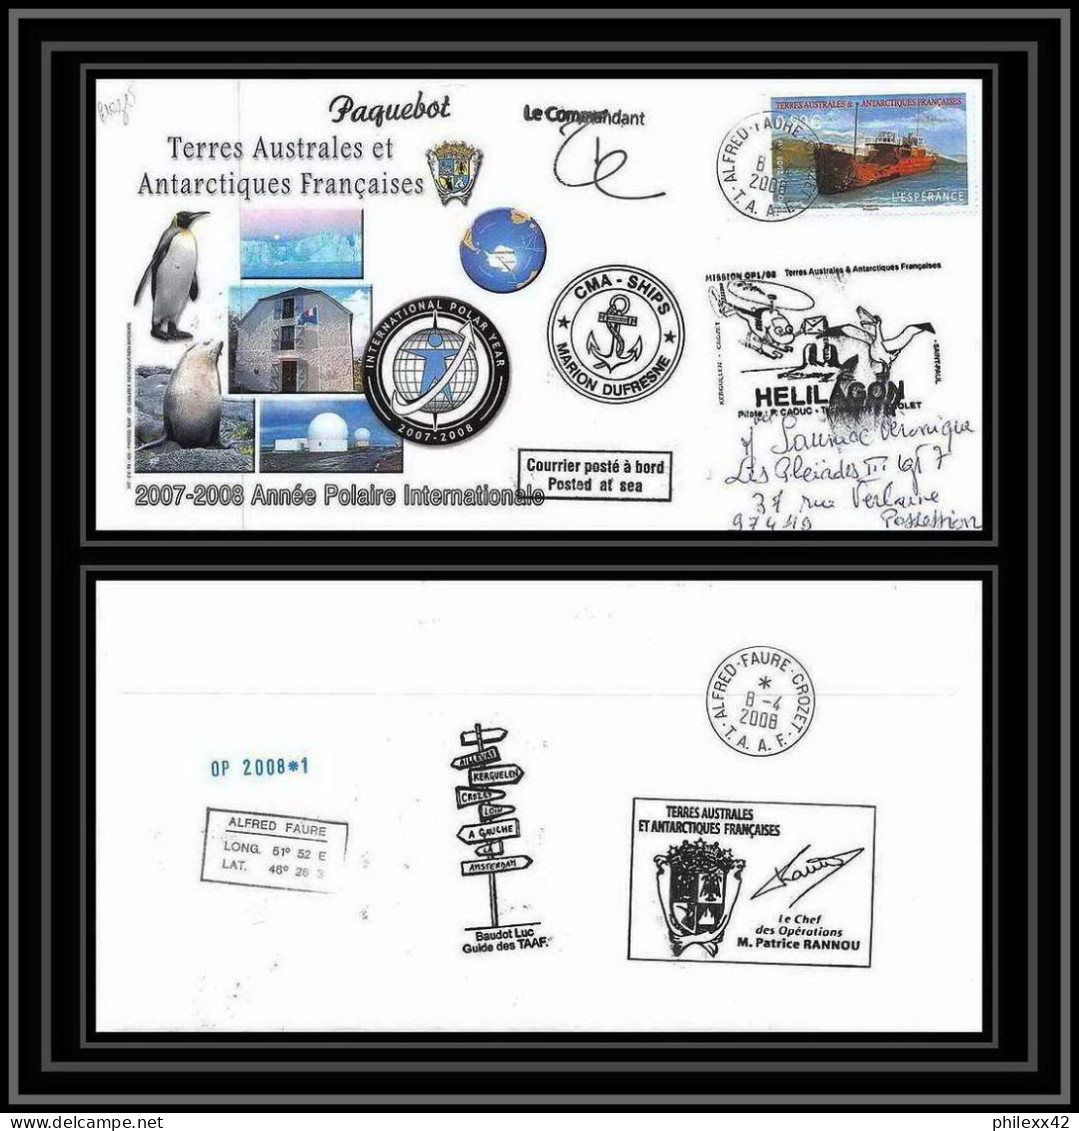 2777 Helilagon Terres Australes TAAF Lettre Cover Dufresne 2 Signé Signed Op 2008/1 Crozet N°503 8/4/2008 - Helicópteros